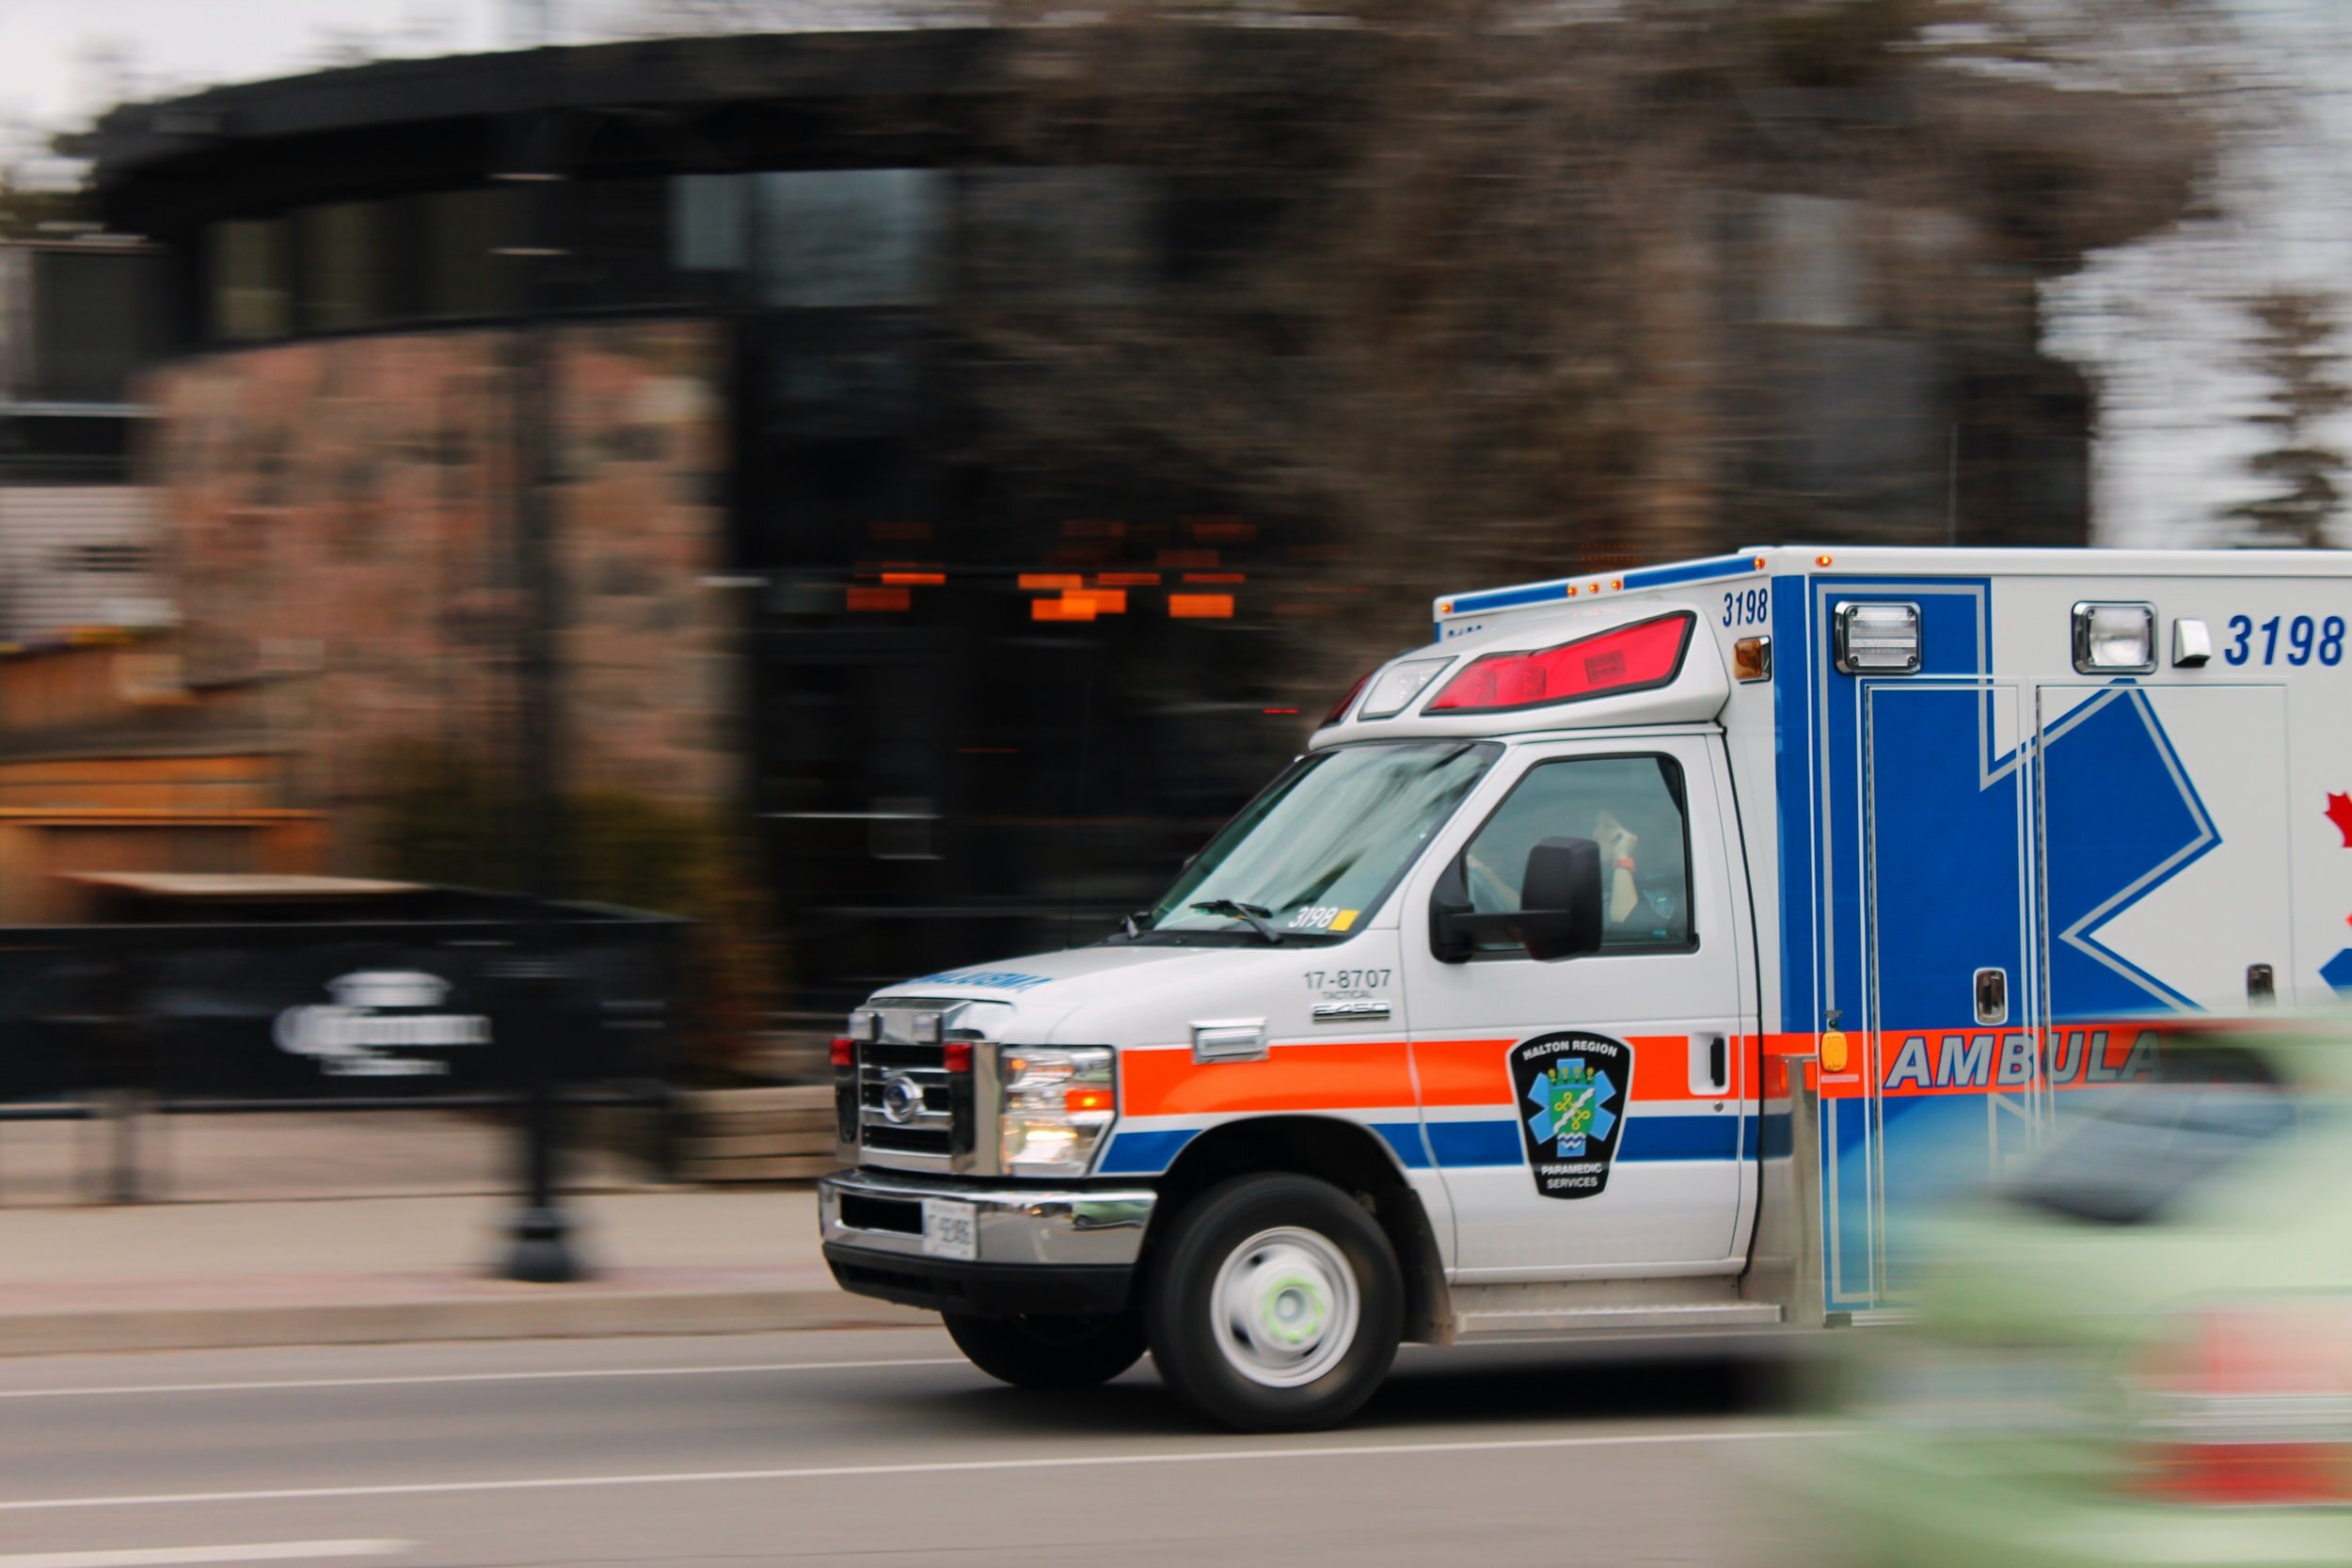 An ambulance in motion, the background blurred.